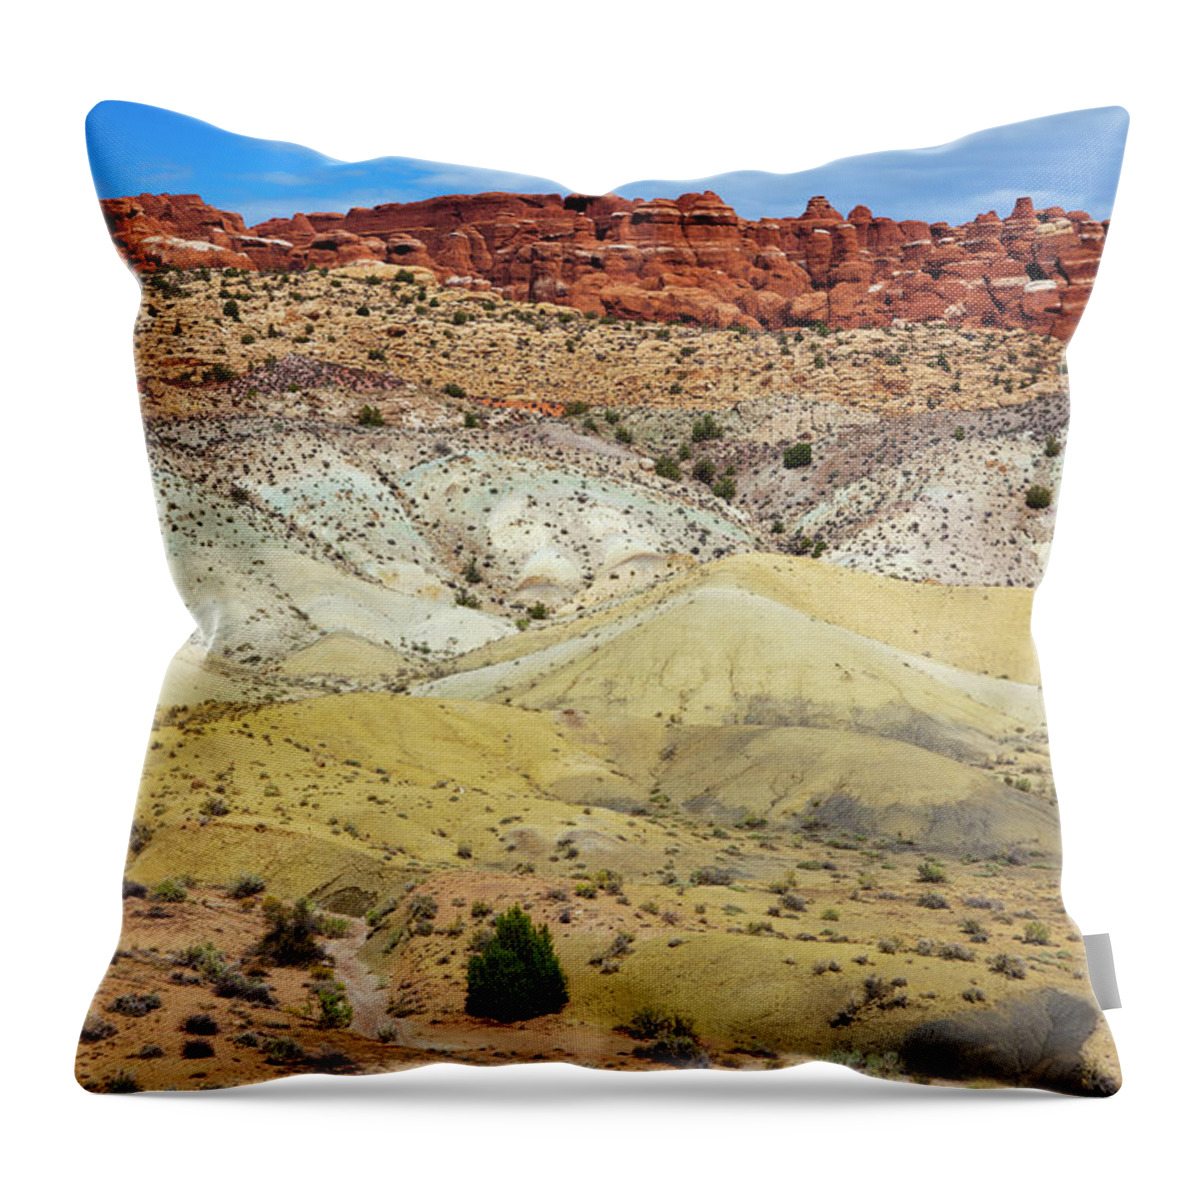 Scenics Throw Pillow featuring the photograph Colorful Salt Valley Sand by Lucynakoch